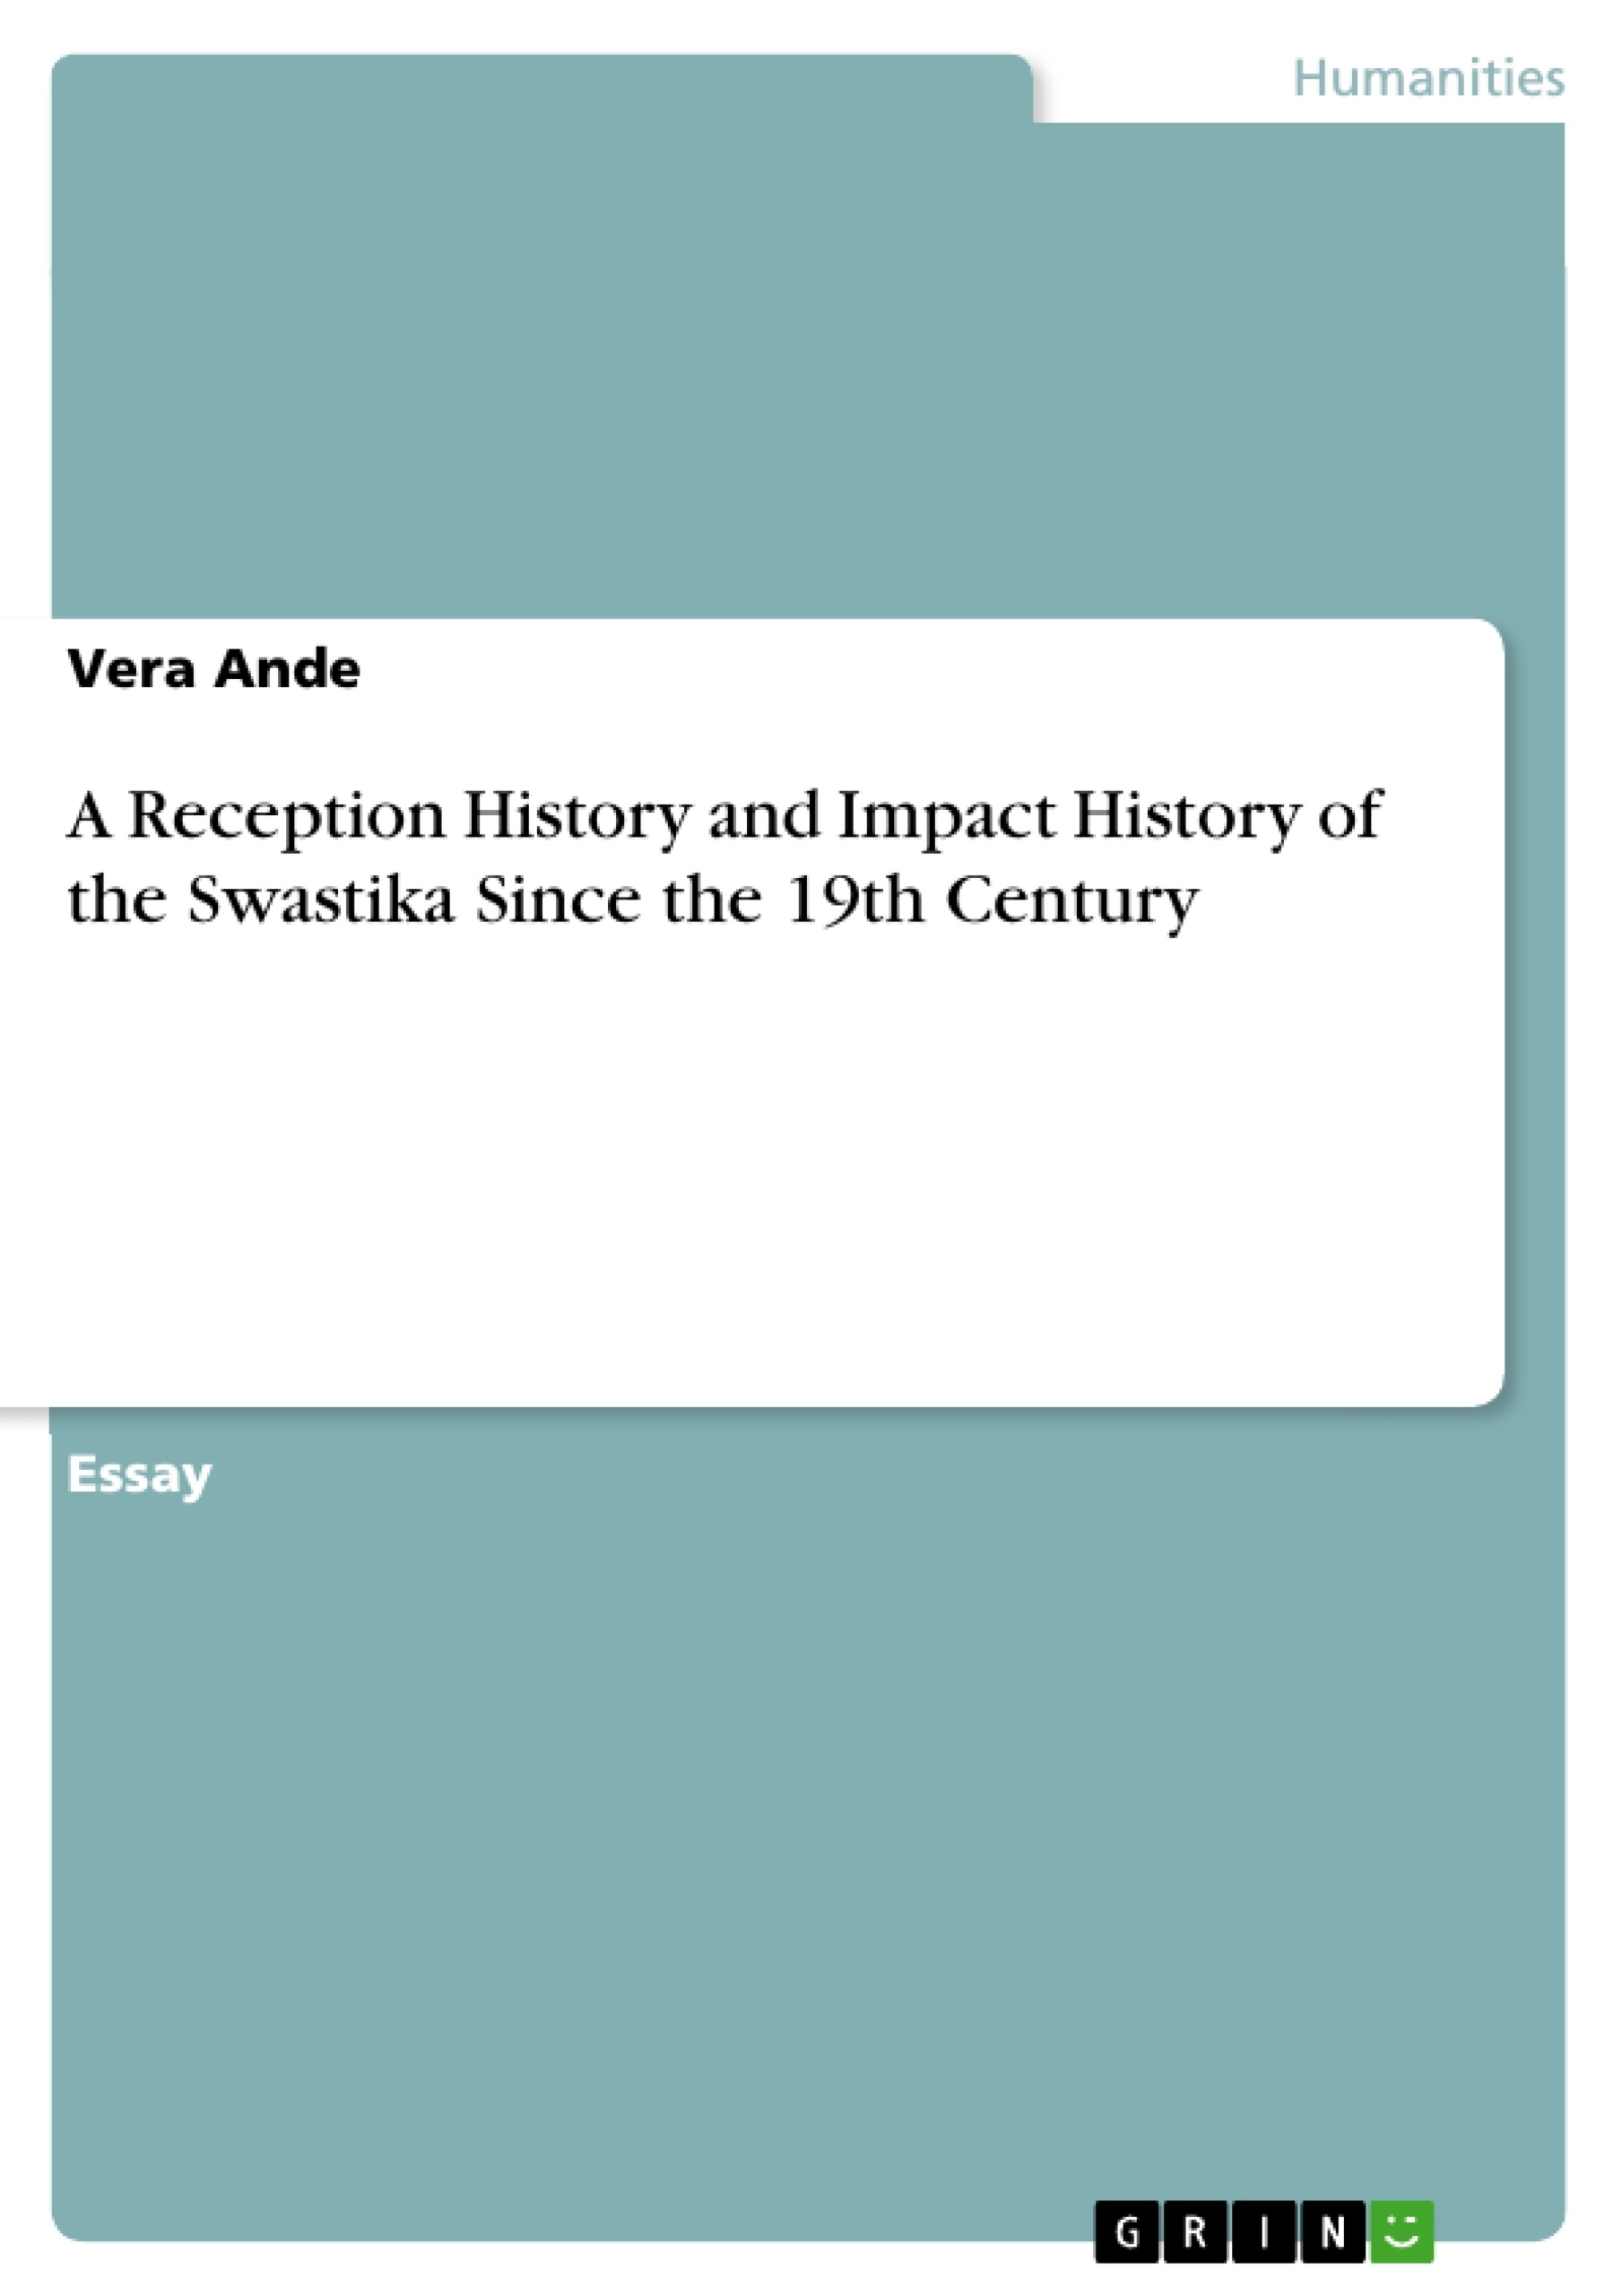 Título: A Reception History and Impact History of the Swastika Since the 19th Century